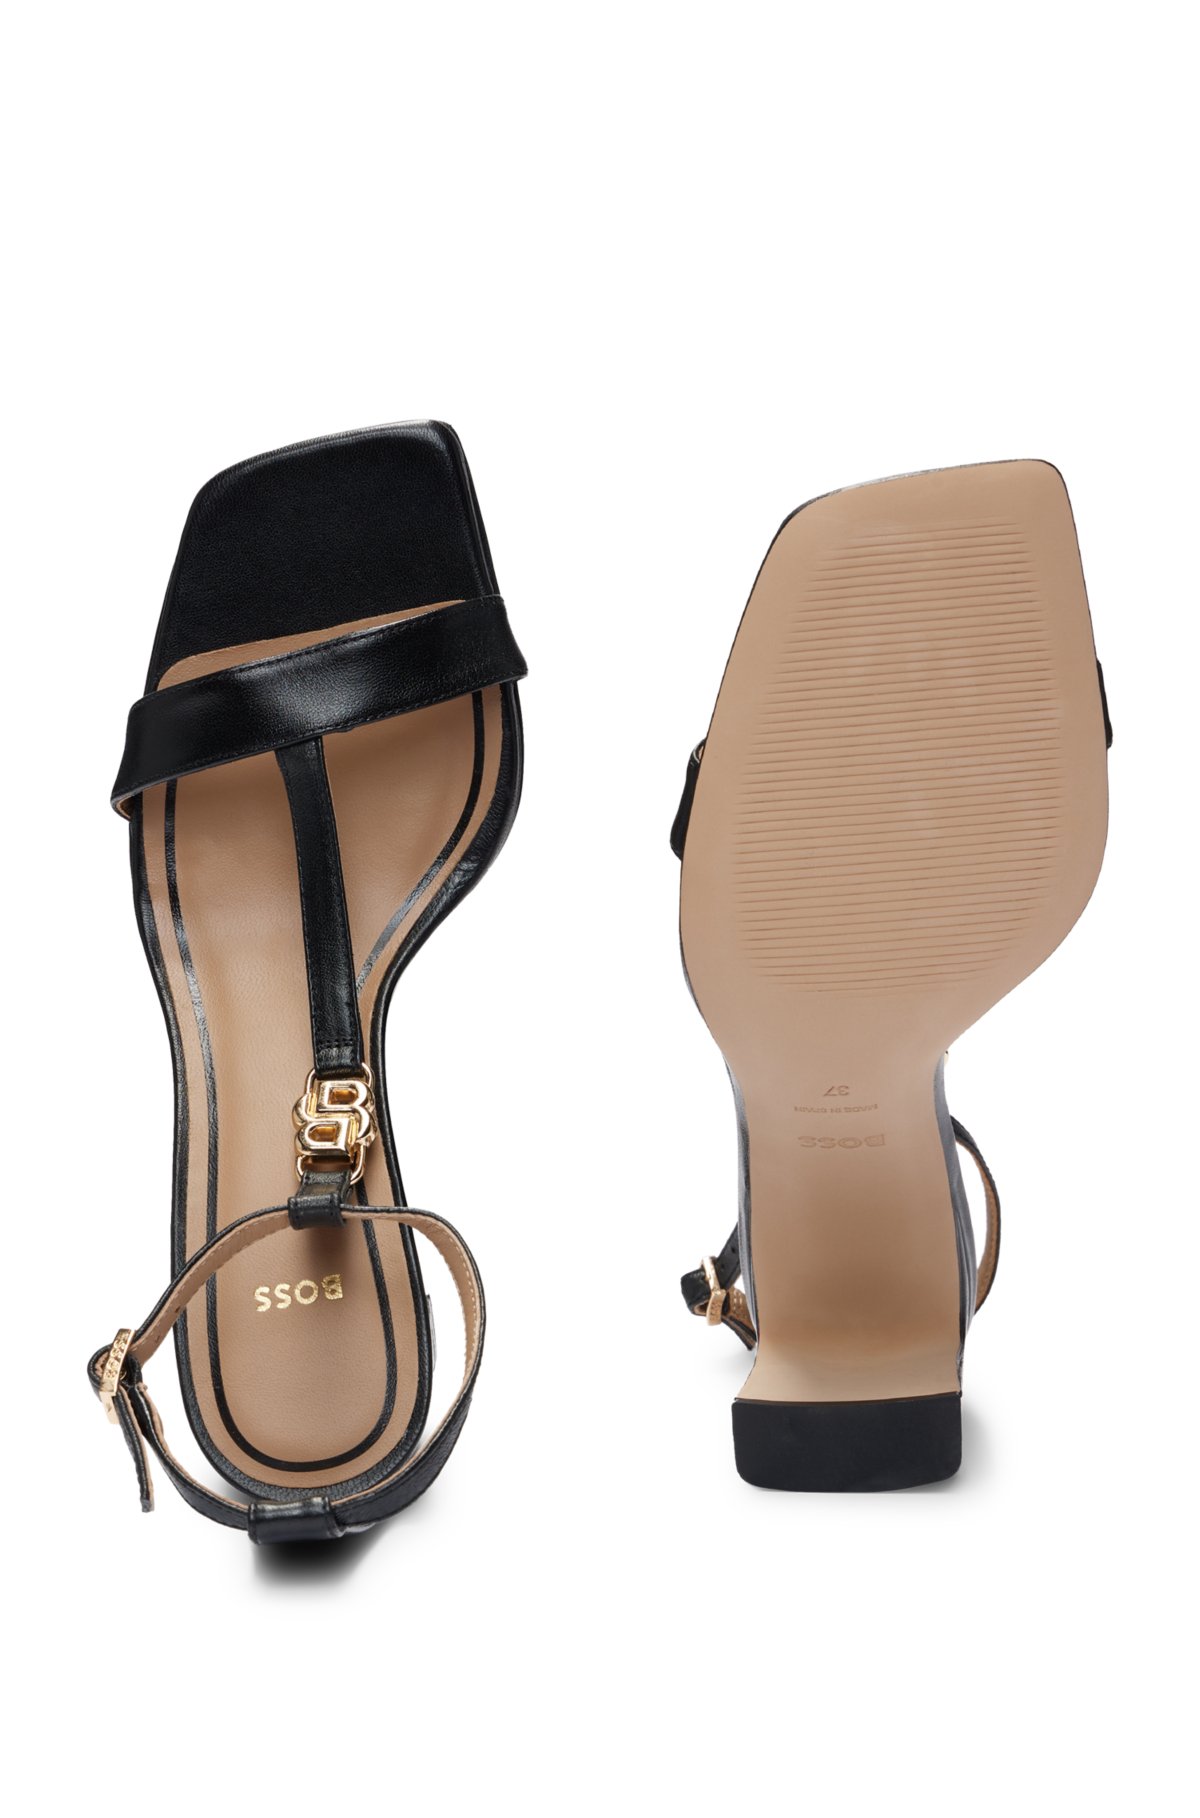 T-bar leather sandals with double monogram, Black